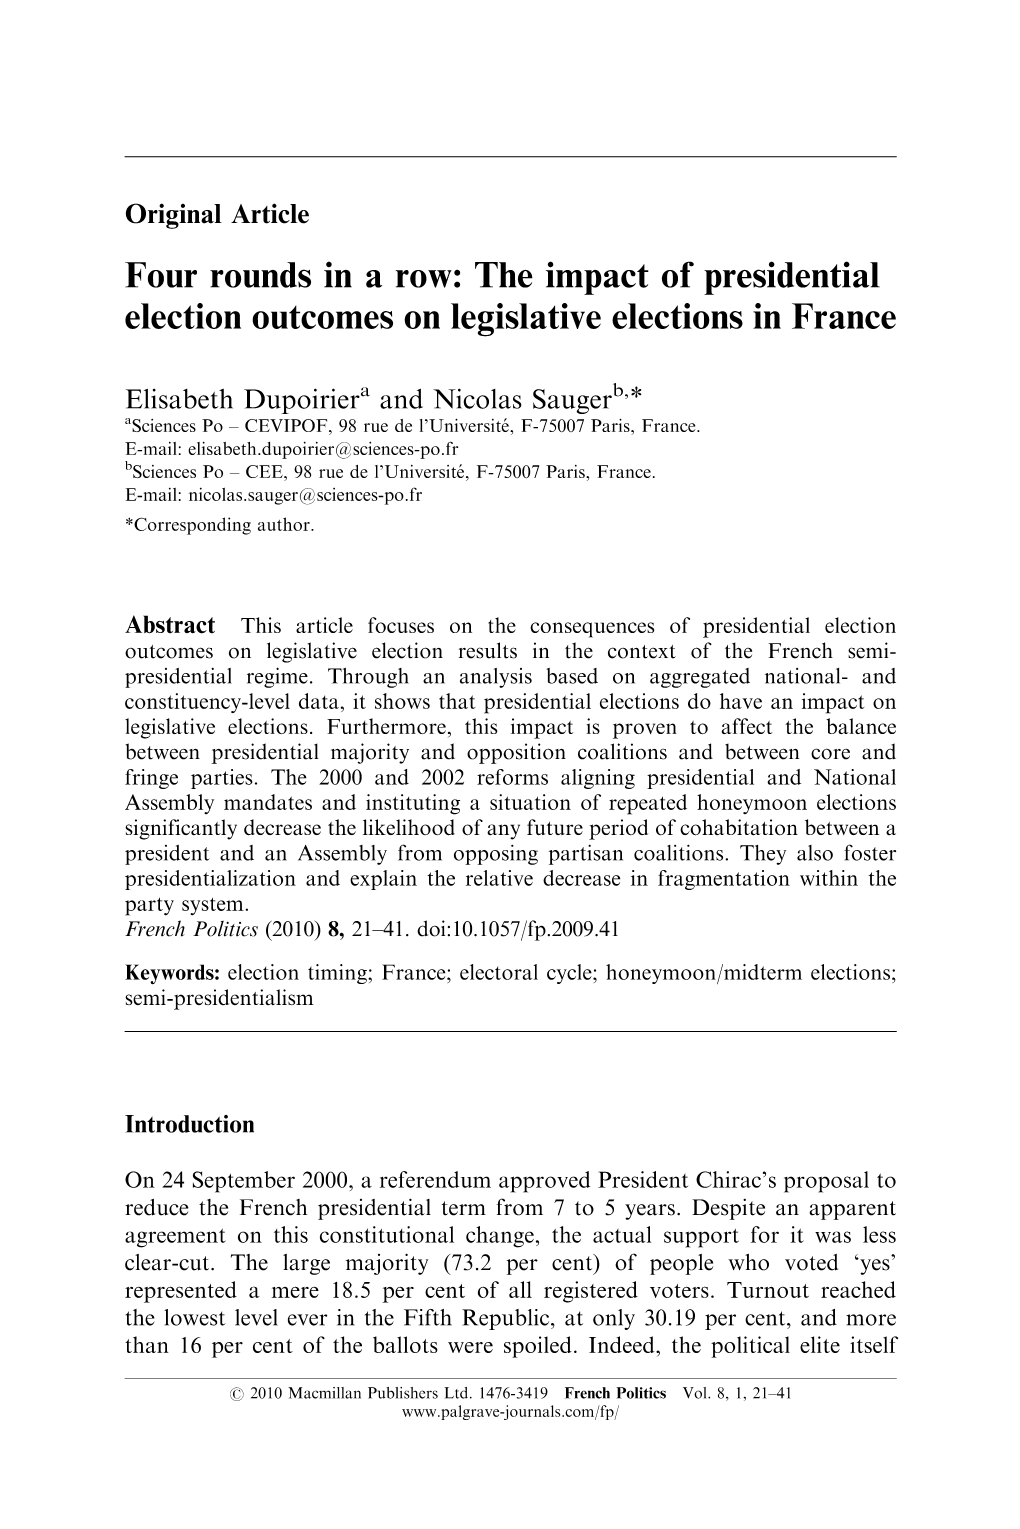 The Impact of Presidential Election Outcomes on Legislative Elections in France